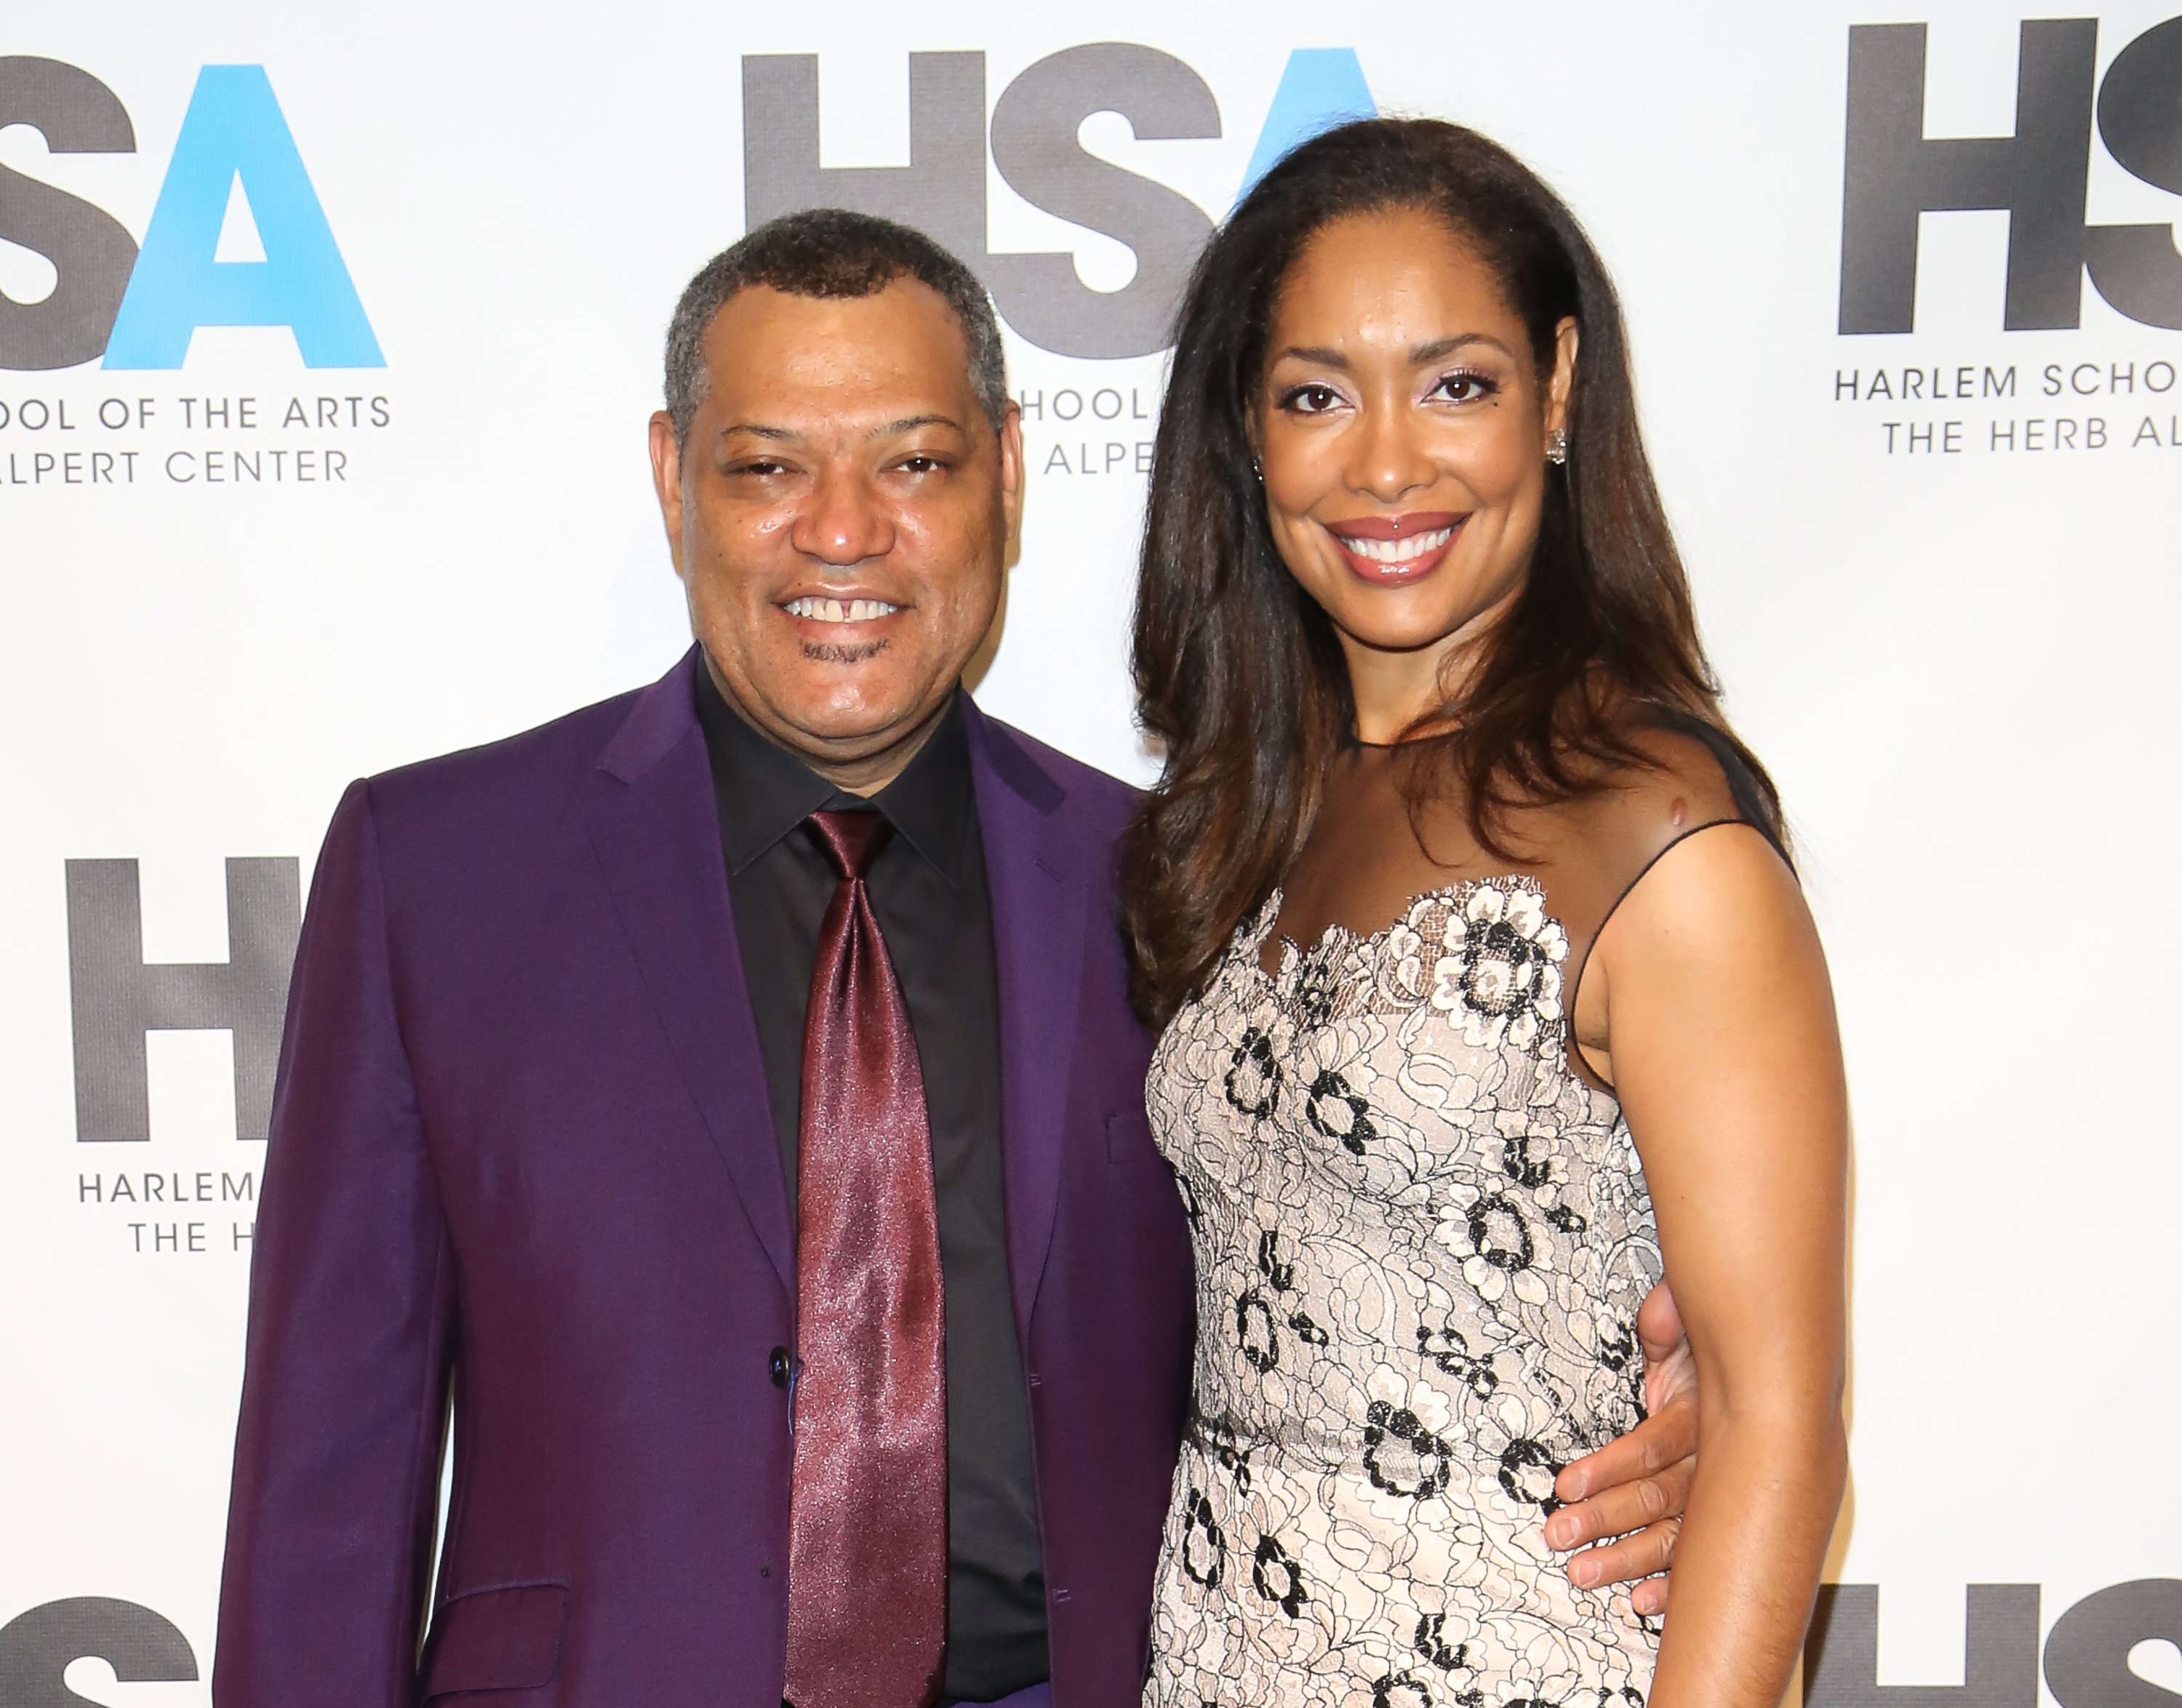 Laurence Fishburne and Gina Torres during The Harlem School Of The Arts Fall Benefit at Jazz at Lincoln Center on October 8, 2013, in New York City. | Source: Getty Images